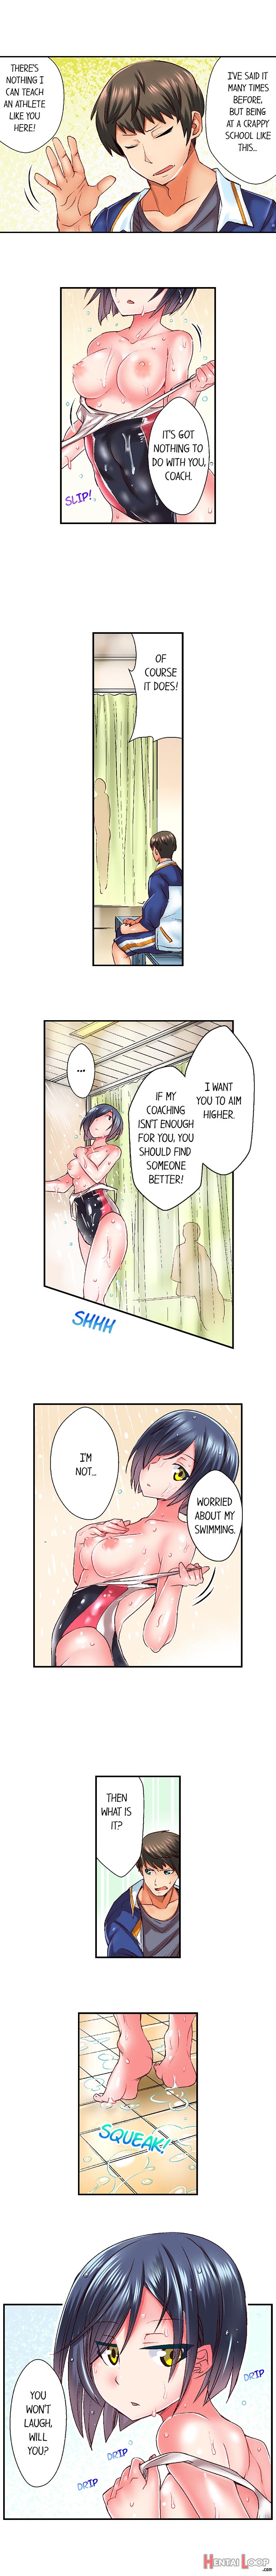 Athlete's Strong Sex Drive Ch. 1 - 12 page 7